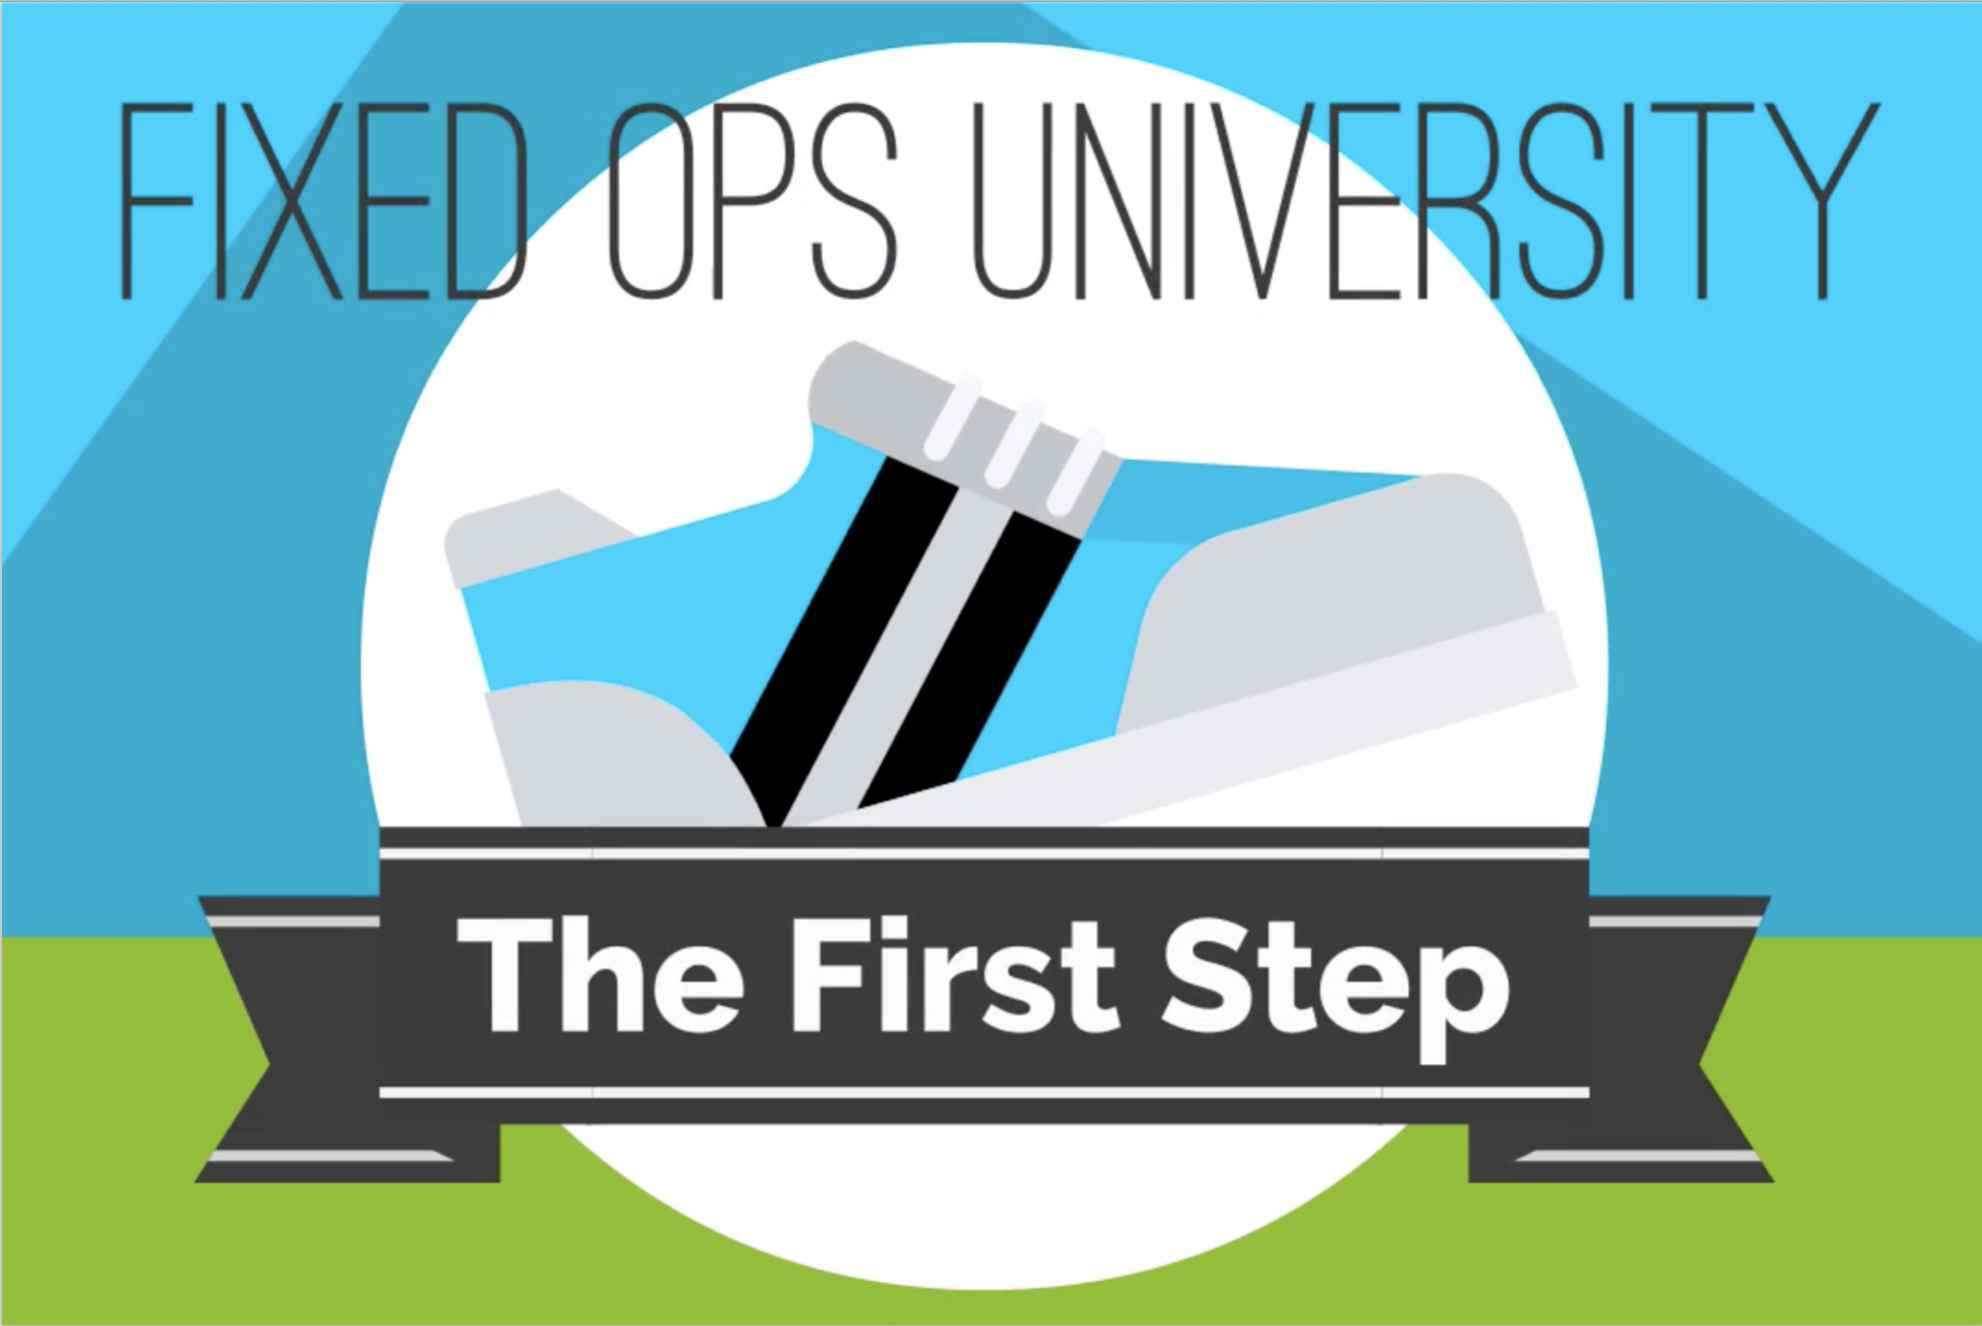 Fixed Ops University The First Step webinar promo image